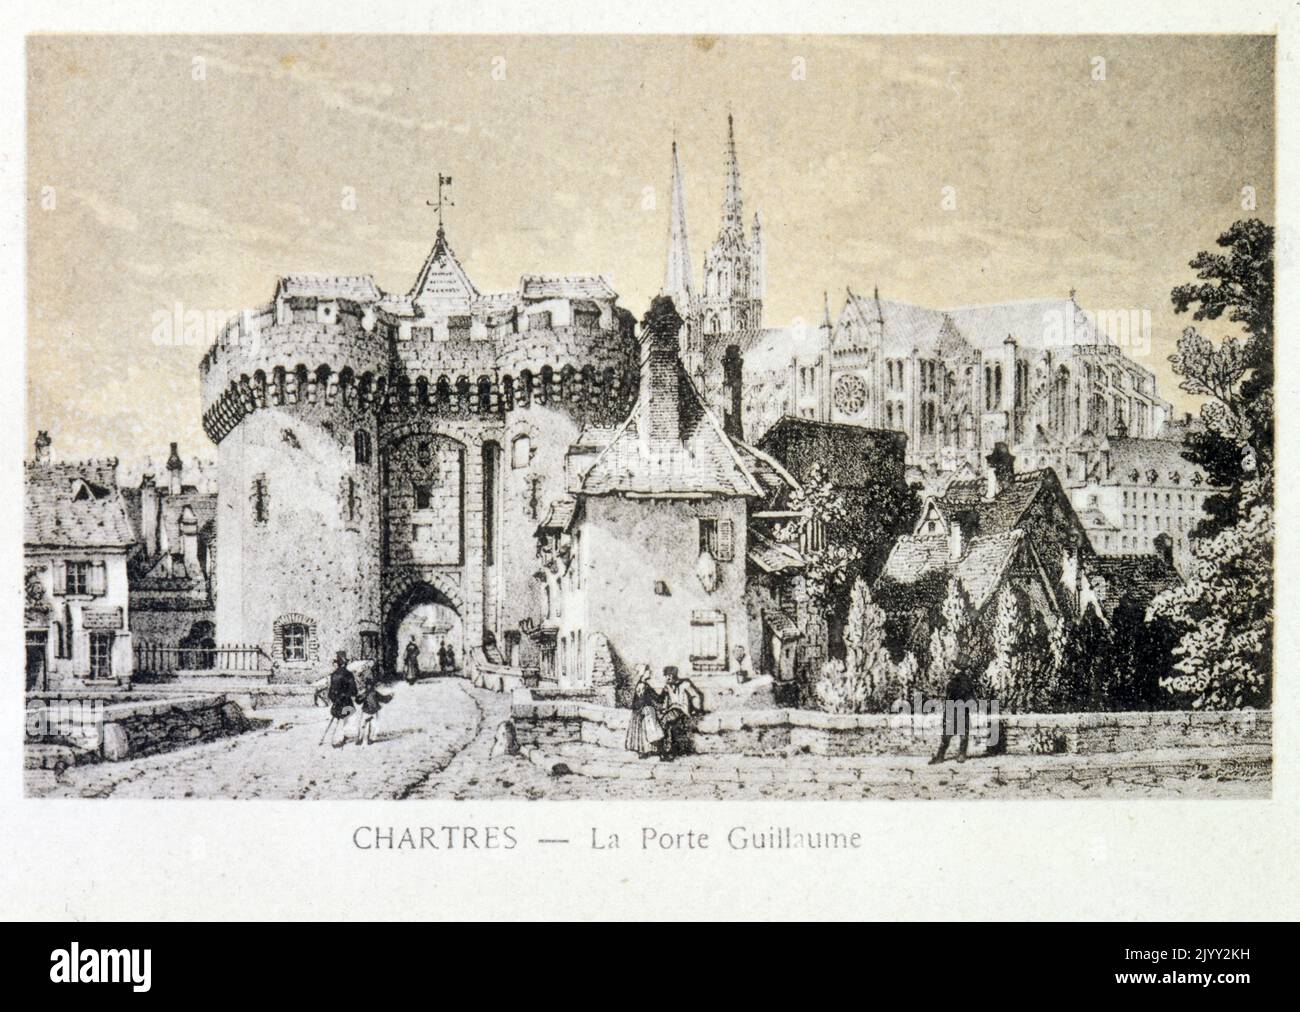 Drawing of the town of Chartres, France showing the Porte Guillaume (14th century), a gateway flanked by towers Stock Photo